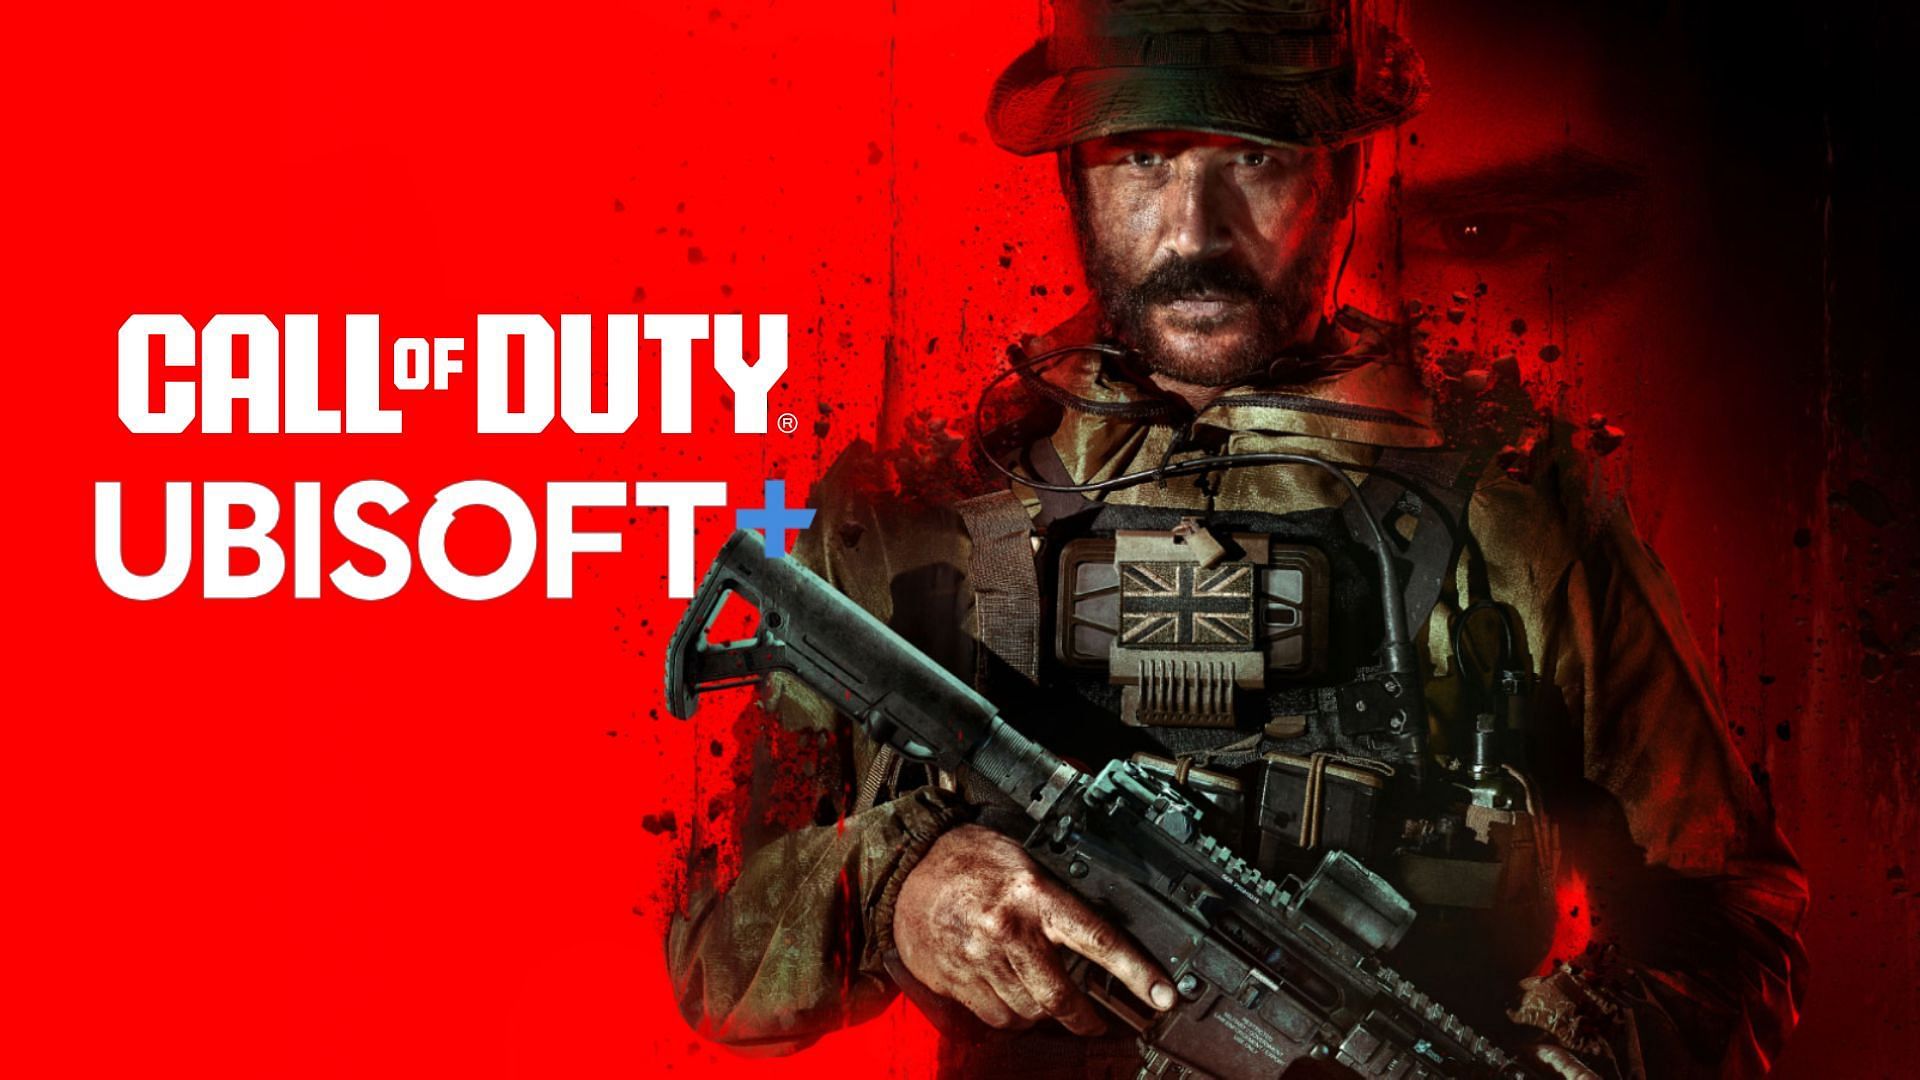 Captain Price from Call of Duty Modern Warfare 3 with Ubisoft+ logo.